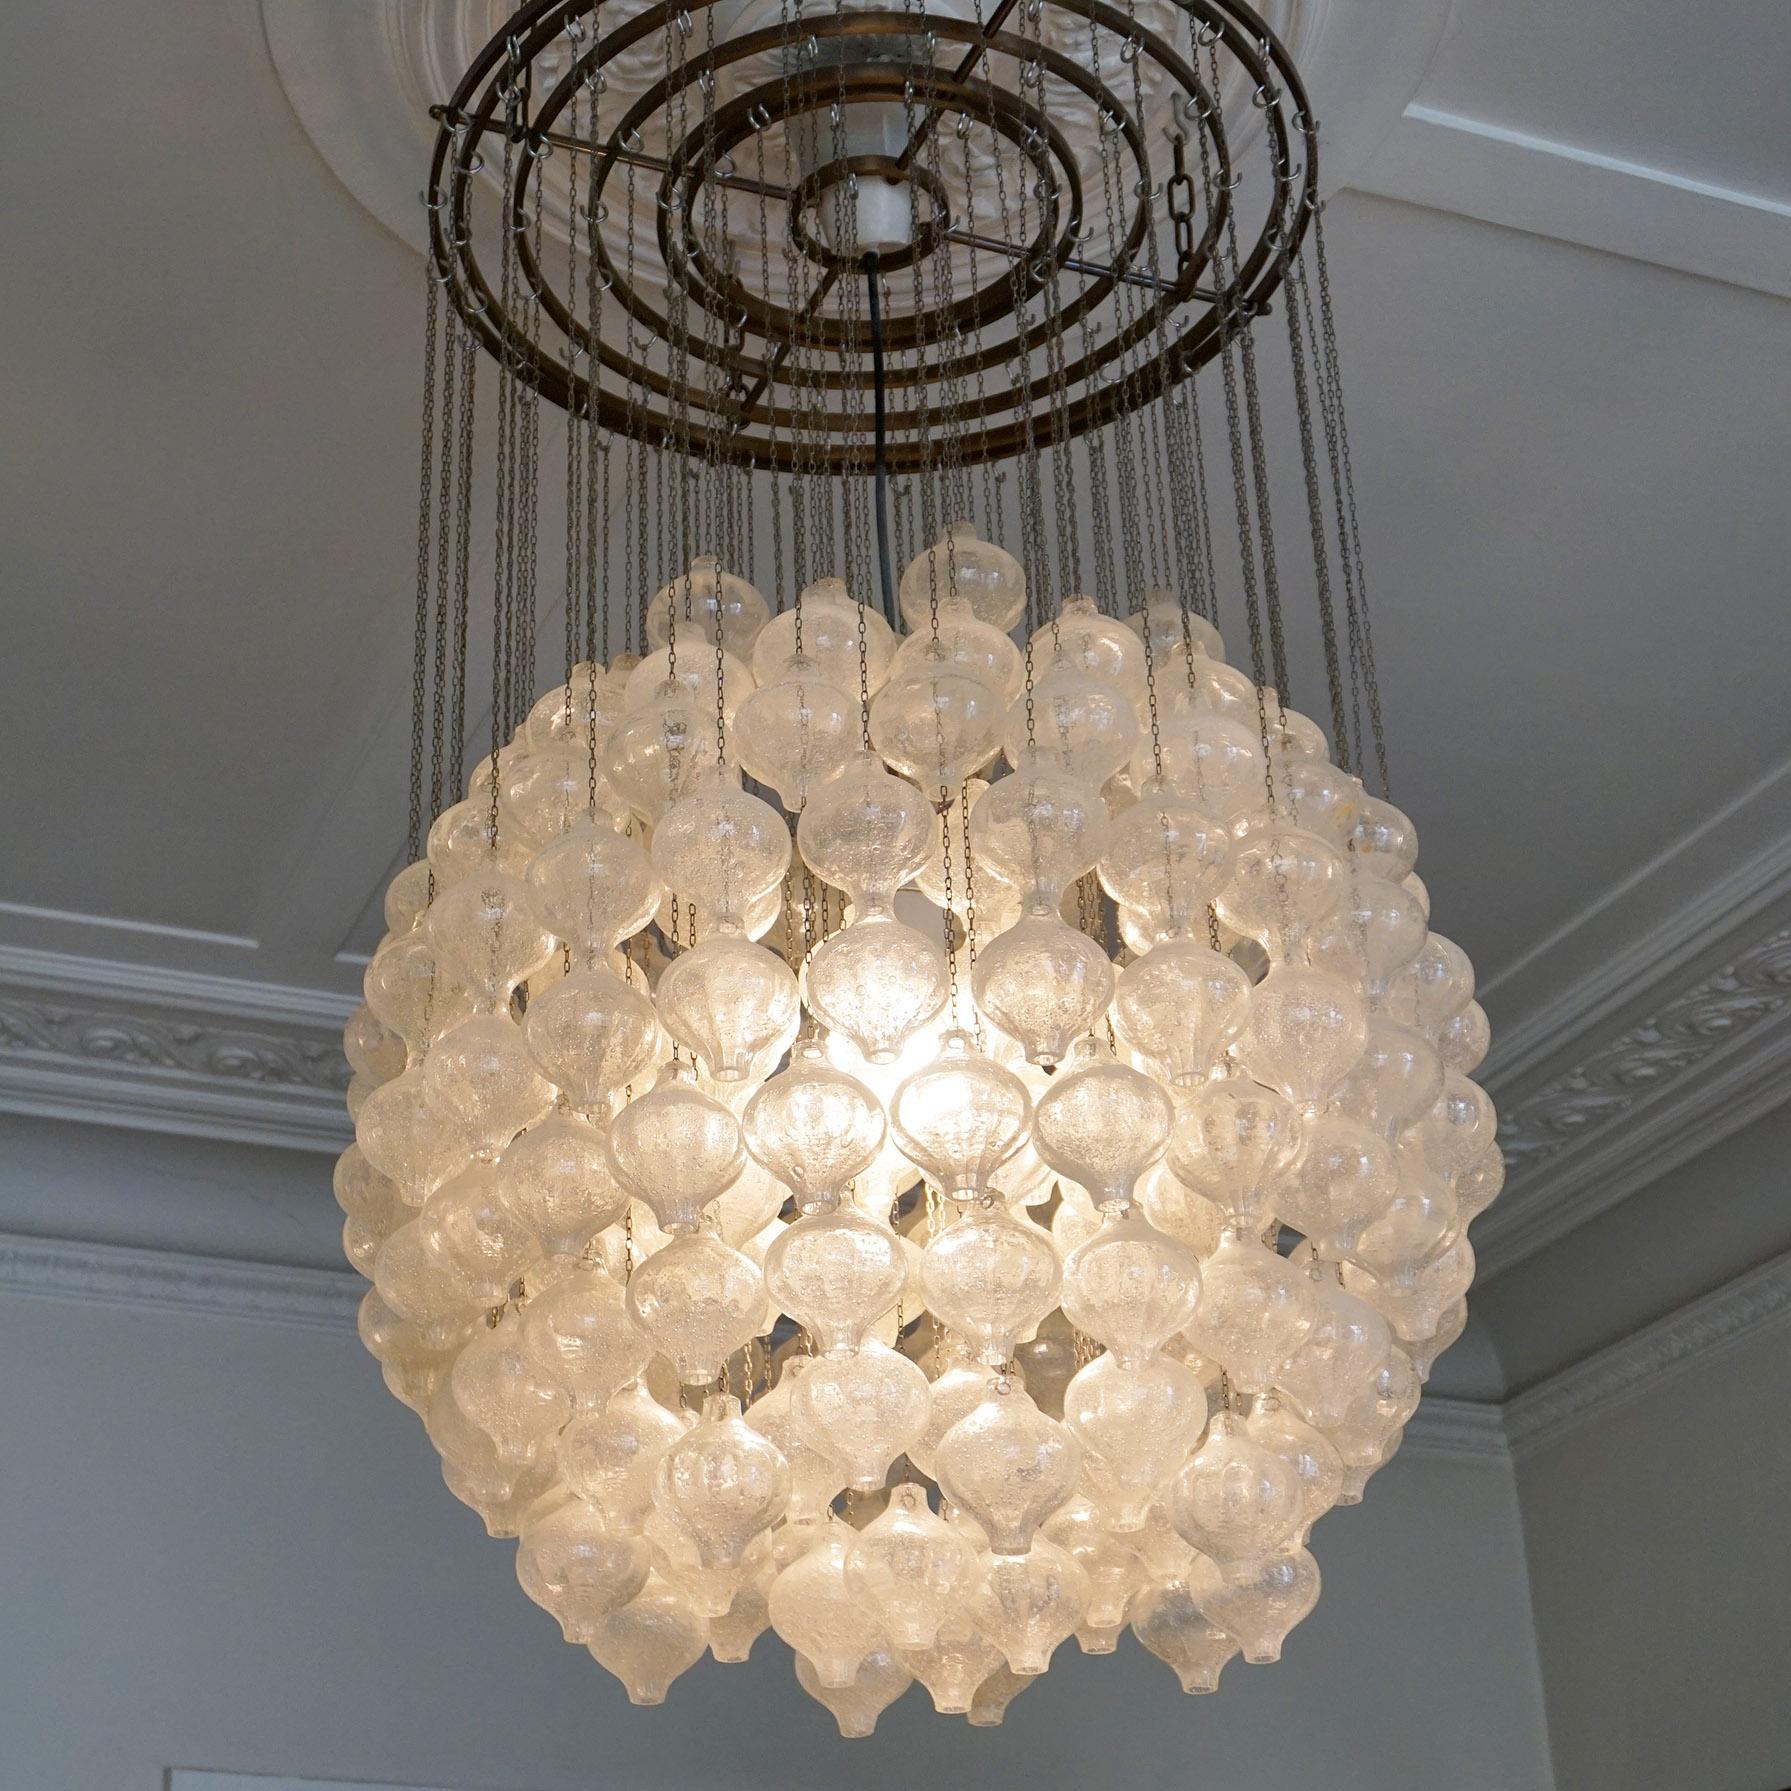 Fantastic and large Kalmar chandelier or Pendant Lamp that consists of numerous blown glass elements which are highly saturated with tiny air bubbles that gives the glass a white look, each element is resting on a nickel chain, elements are hanging